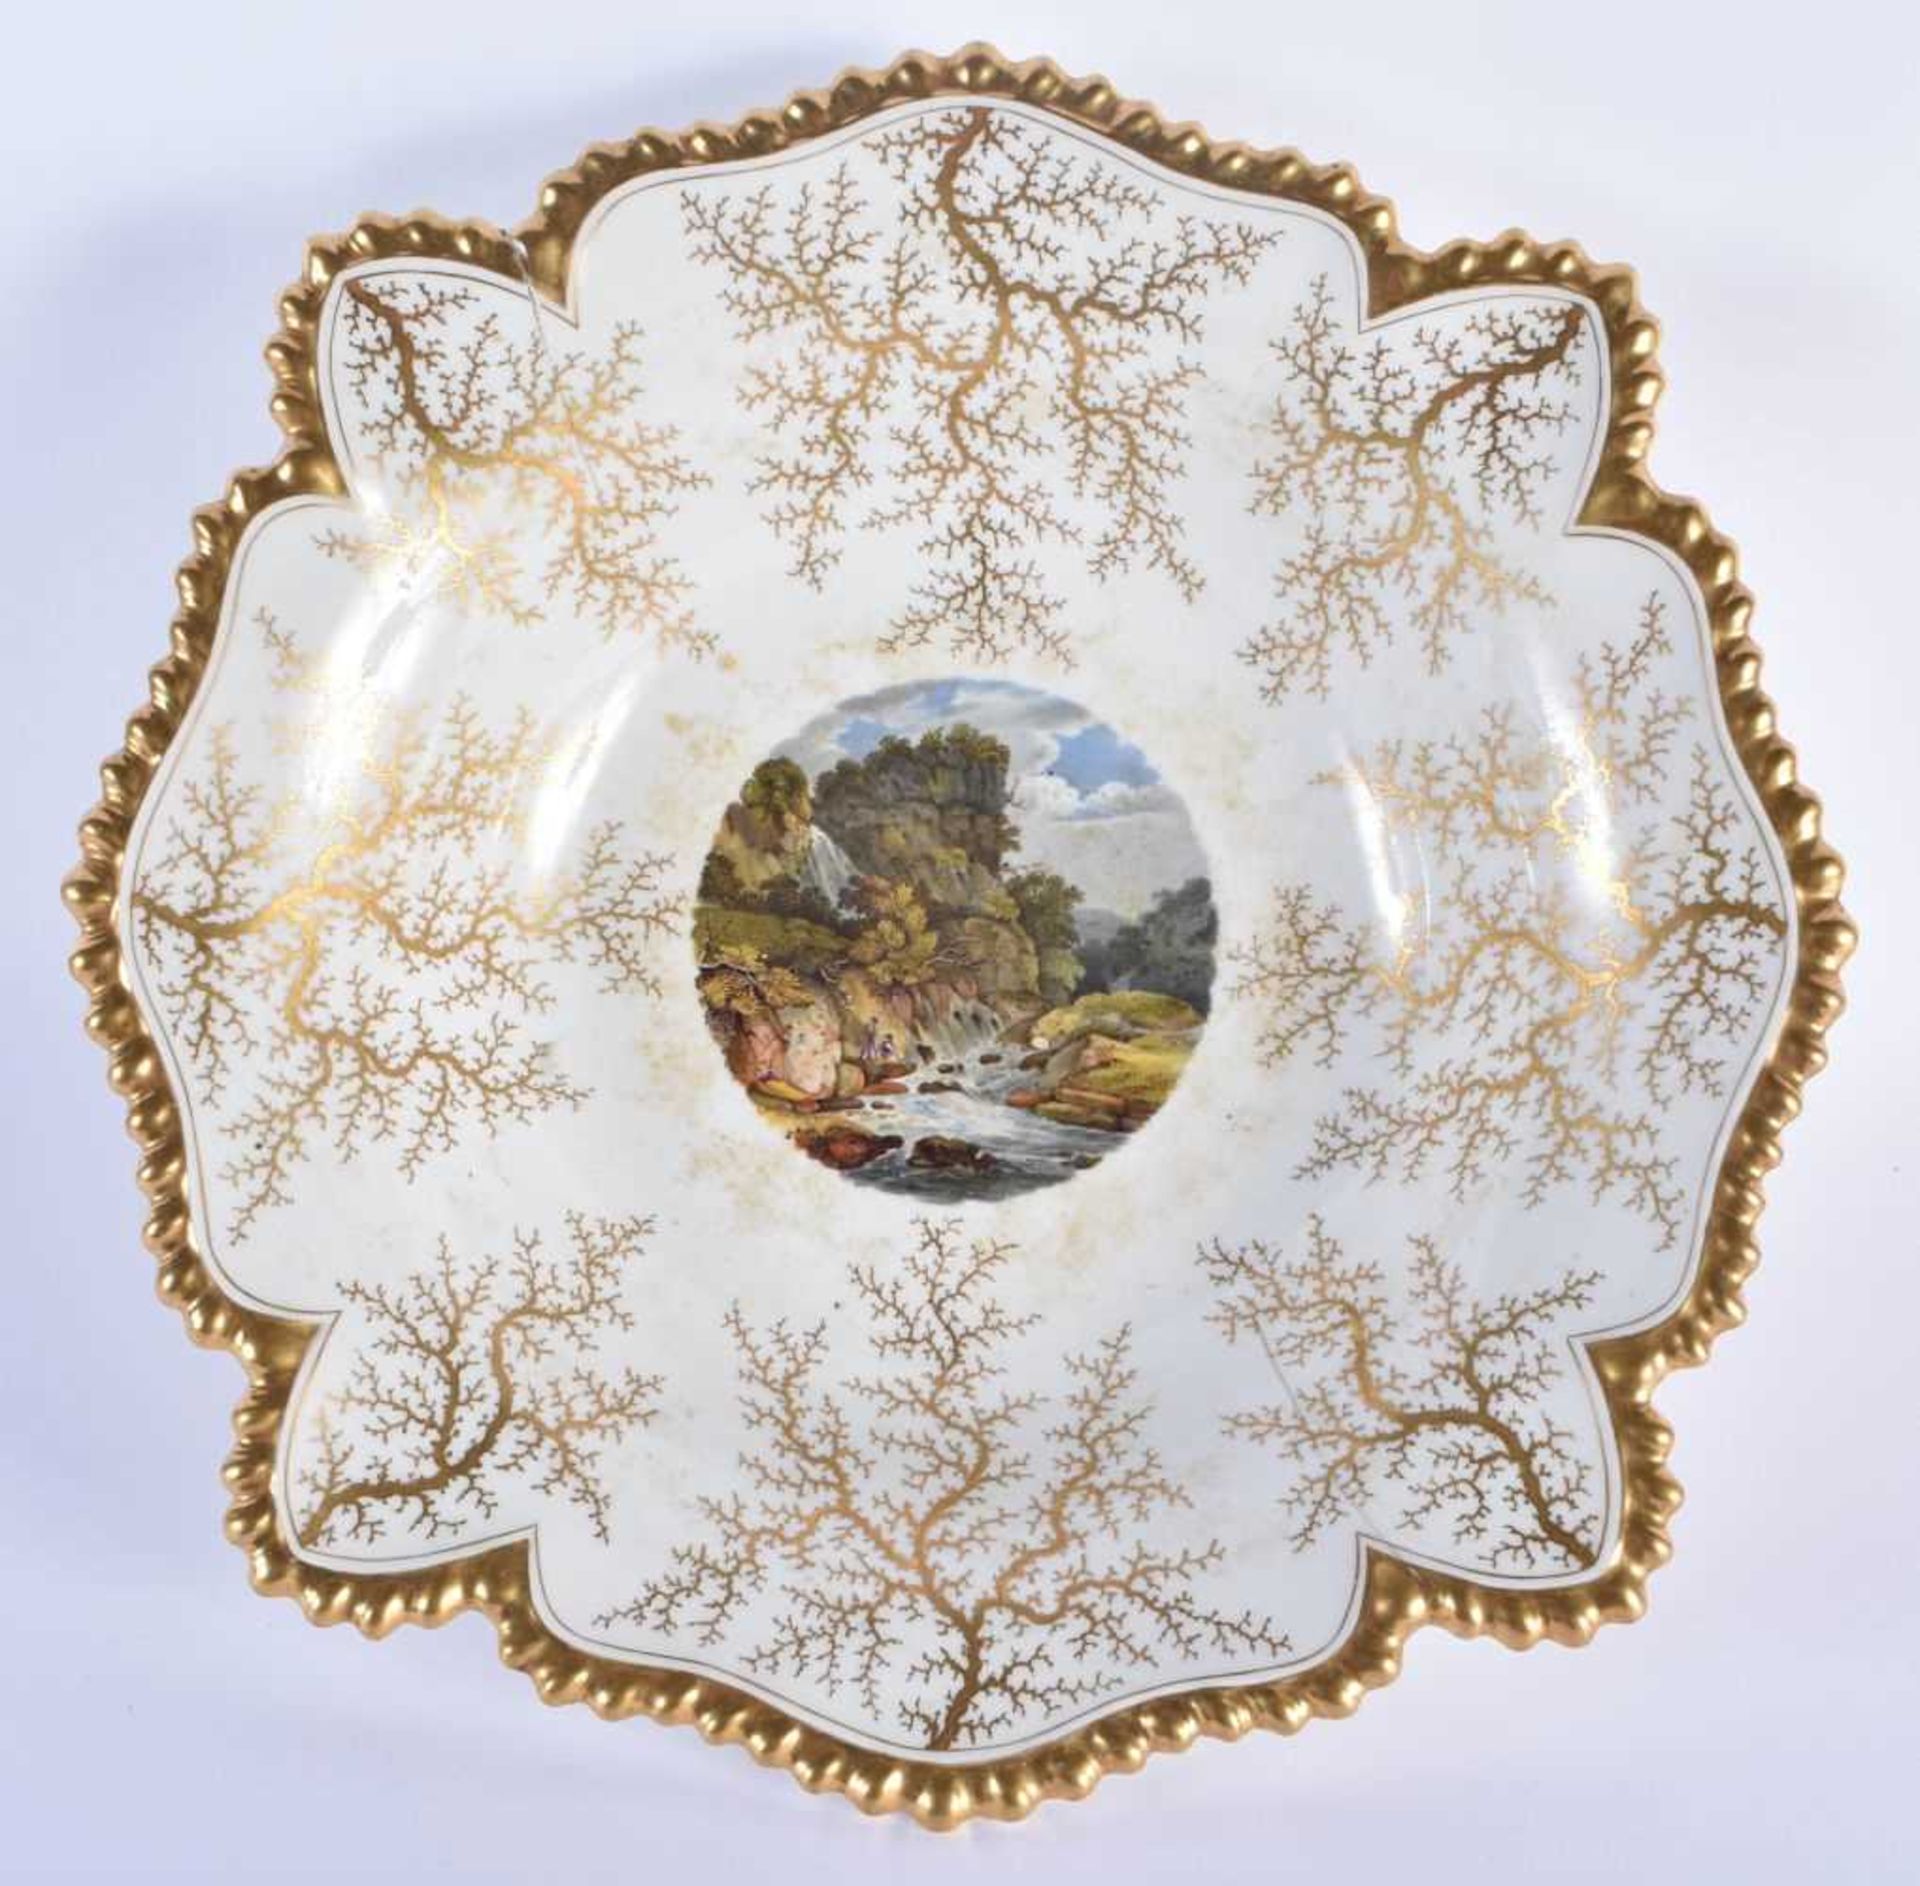 A FINE EARLY 19TH CENTURY FLIGHT BARR AND BARR WORCESTER DESSERT SERVICE painted with landscapes and - Image 14 of 32